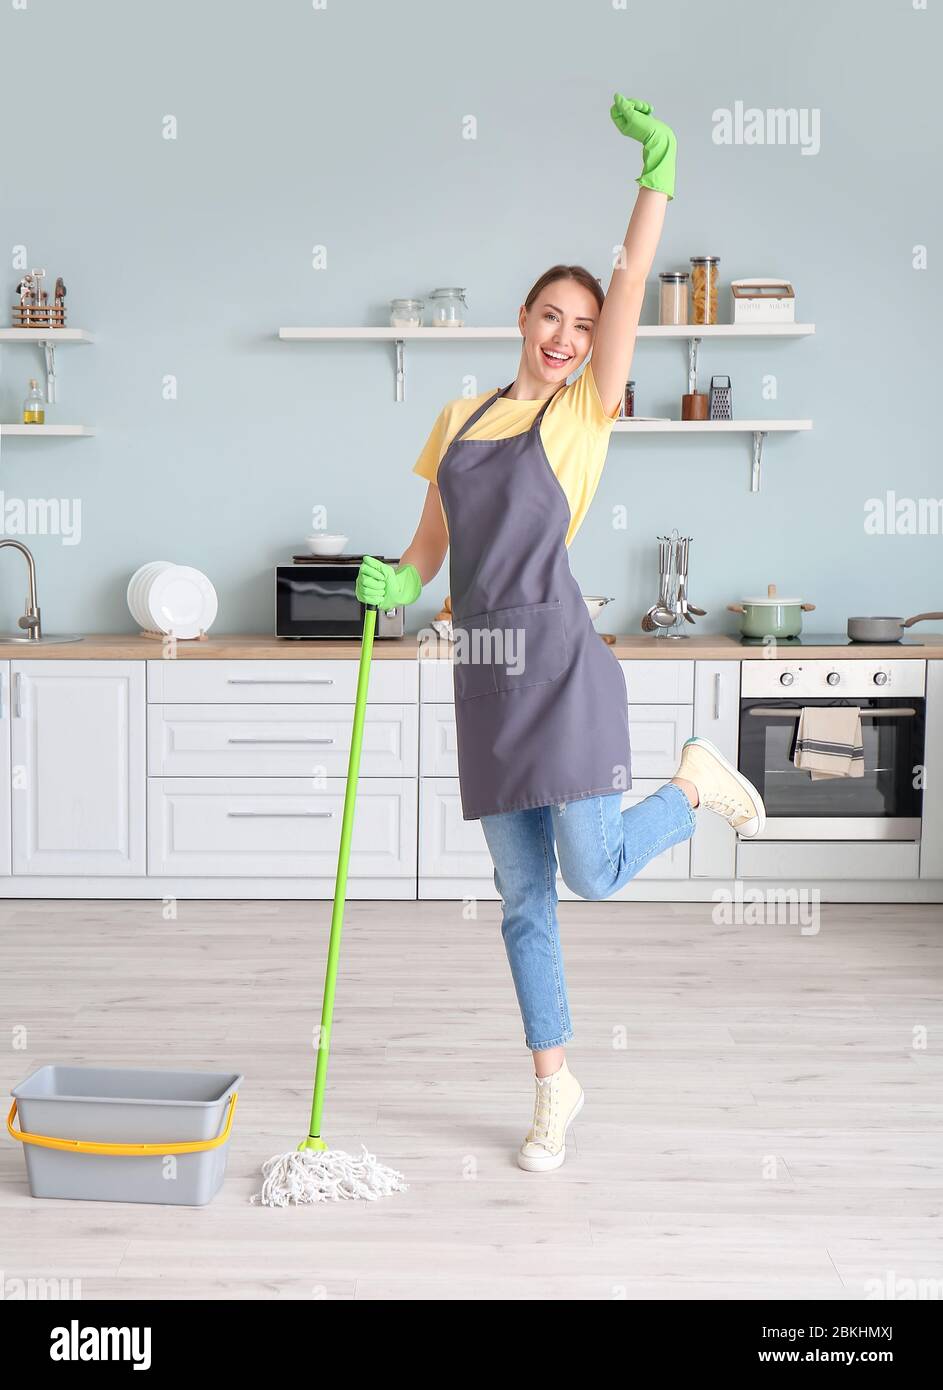 Young woman having fun while mopping floor in kitchen Stock Photo